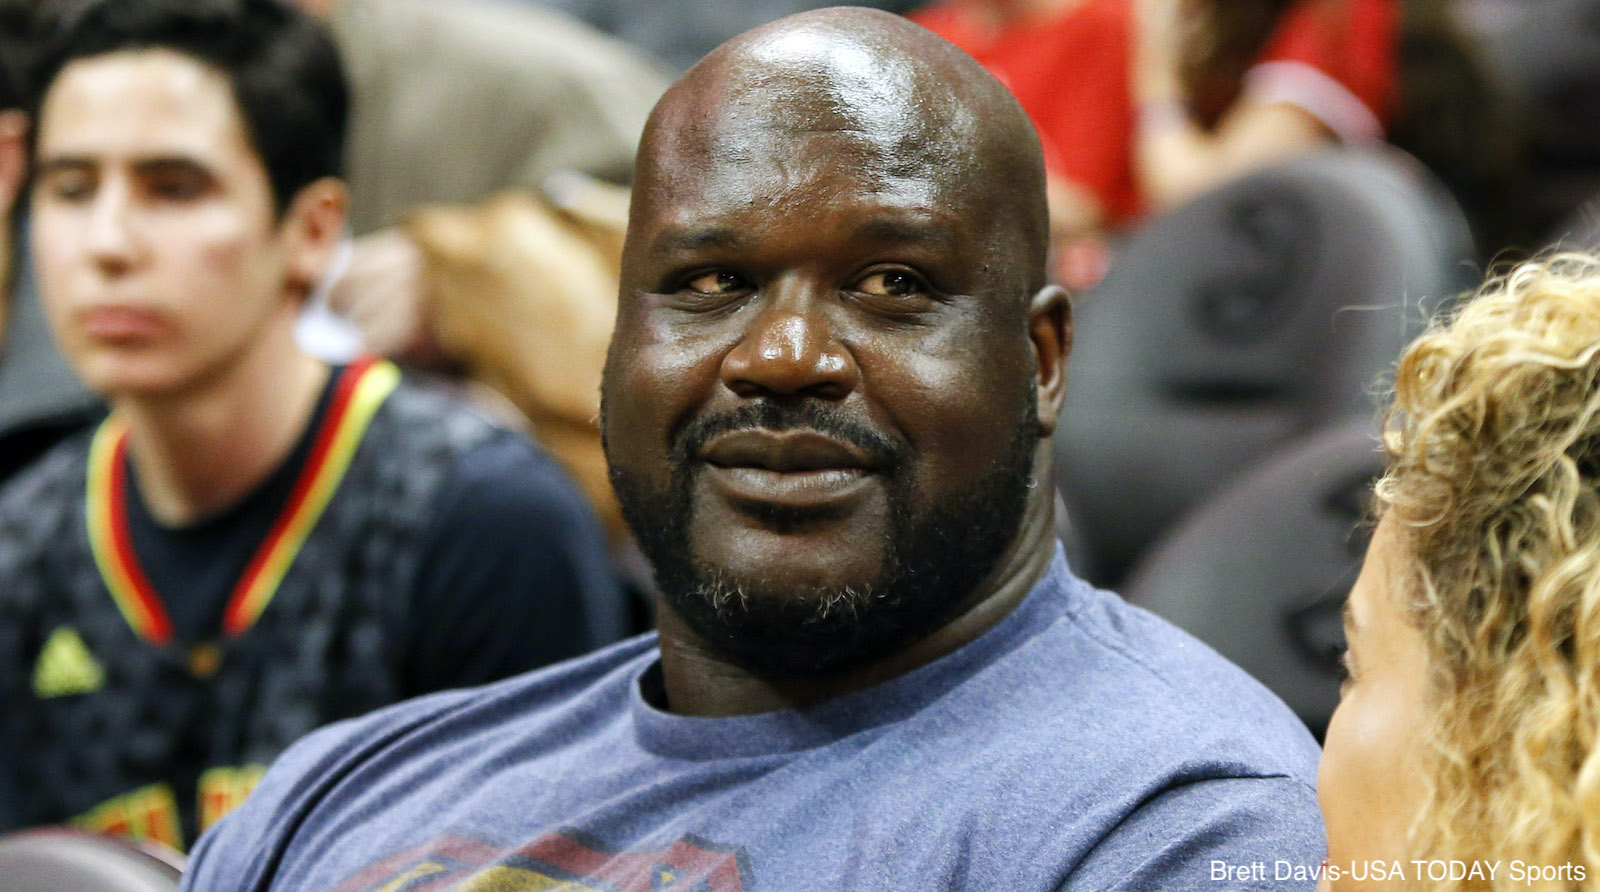 ESPN - The Seattle Kraken sweater is Shaquille O' Neal approved